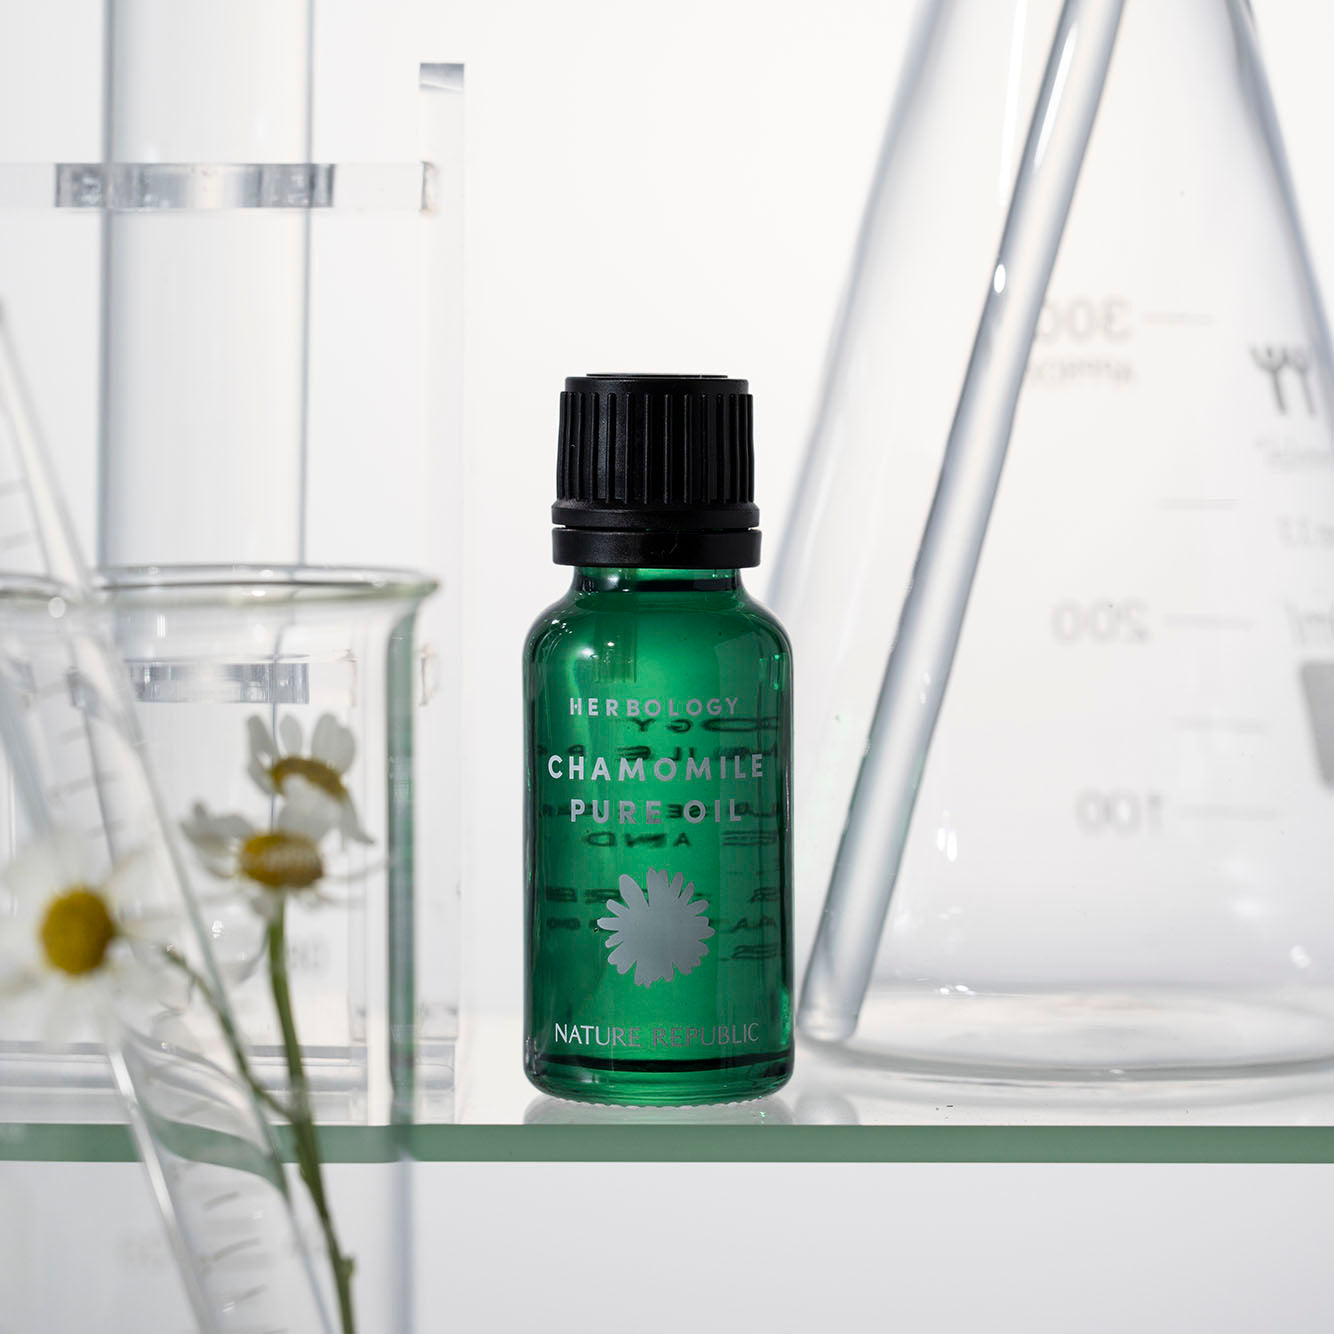 HERBOLOGY Chamomile Pure Oil